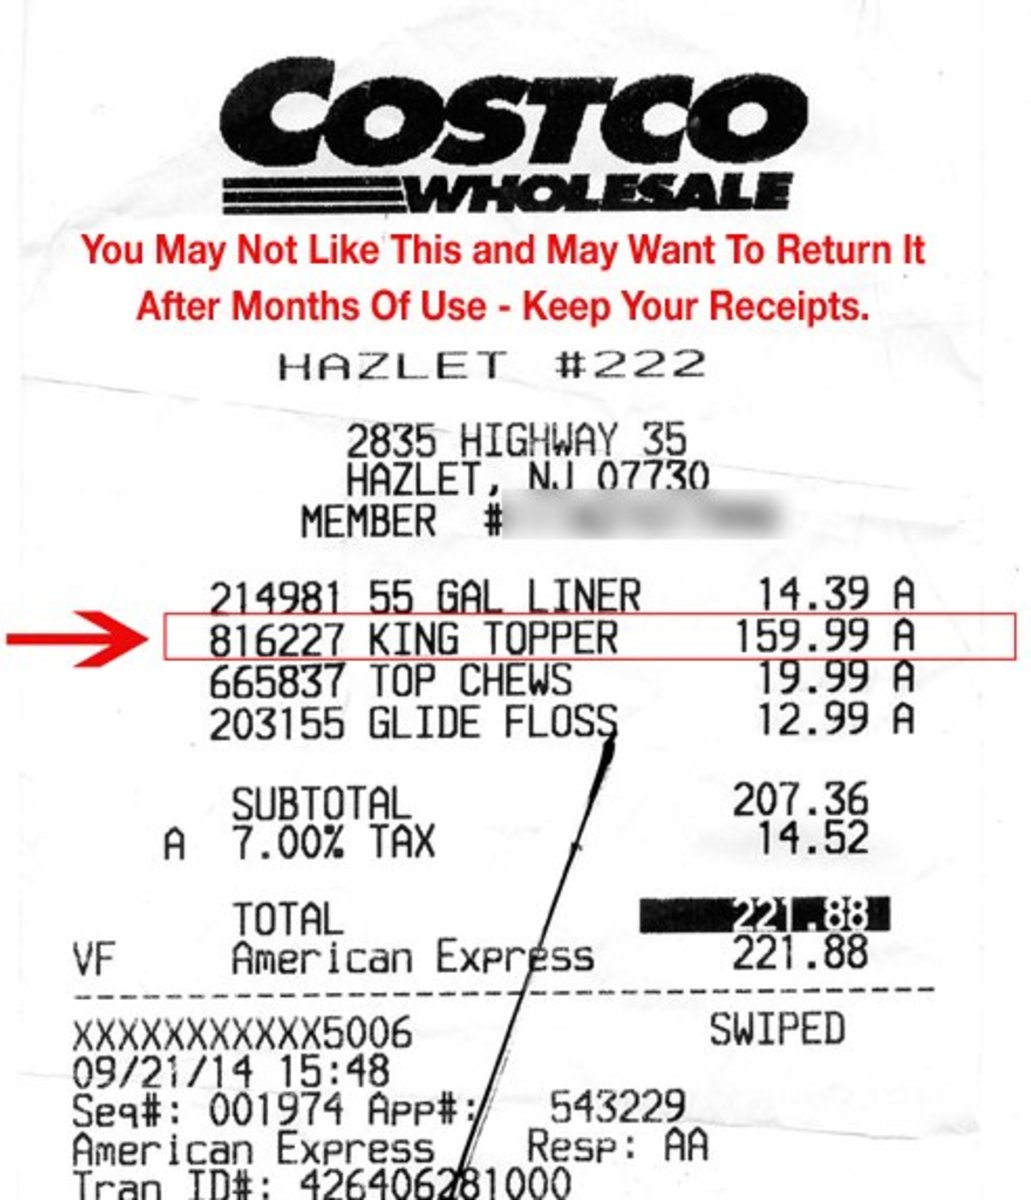 Always save receipts, especially on large purchases